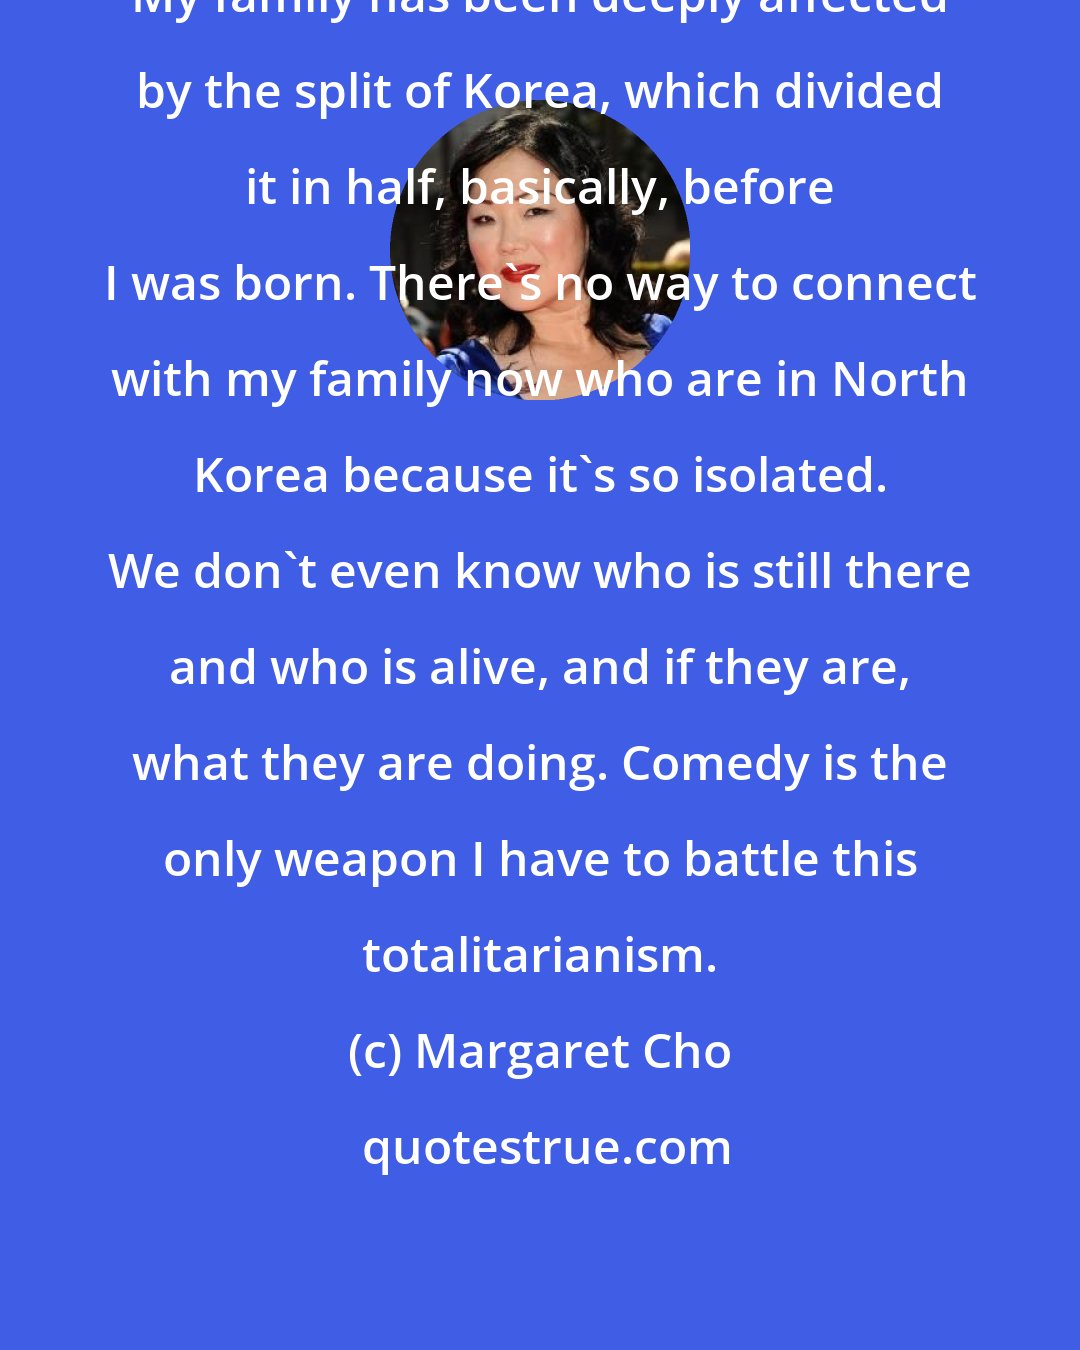 Margaret Cho: My family has been deeply affected by the split of Korea, which divided it in half, basically, before I was born. There's no way to connect with my family now who are in North Korea because it's so isolated. We don't even know who is still there and who is alive, and if they are, what they are doing. Comedy is the only weapon I have to battle this totalitarianism.